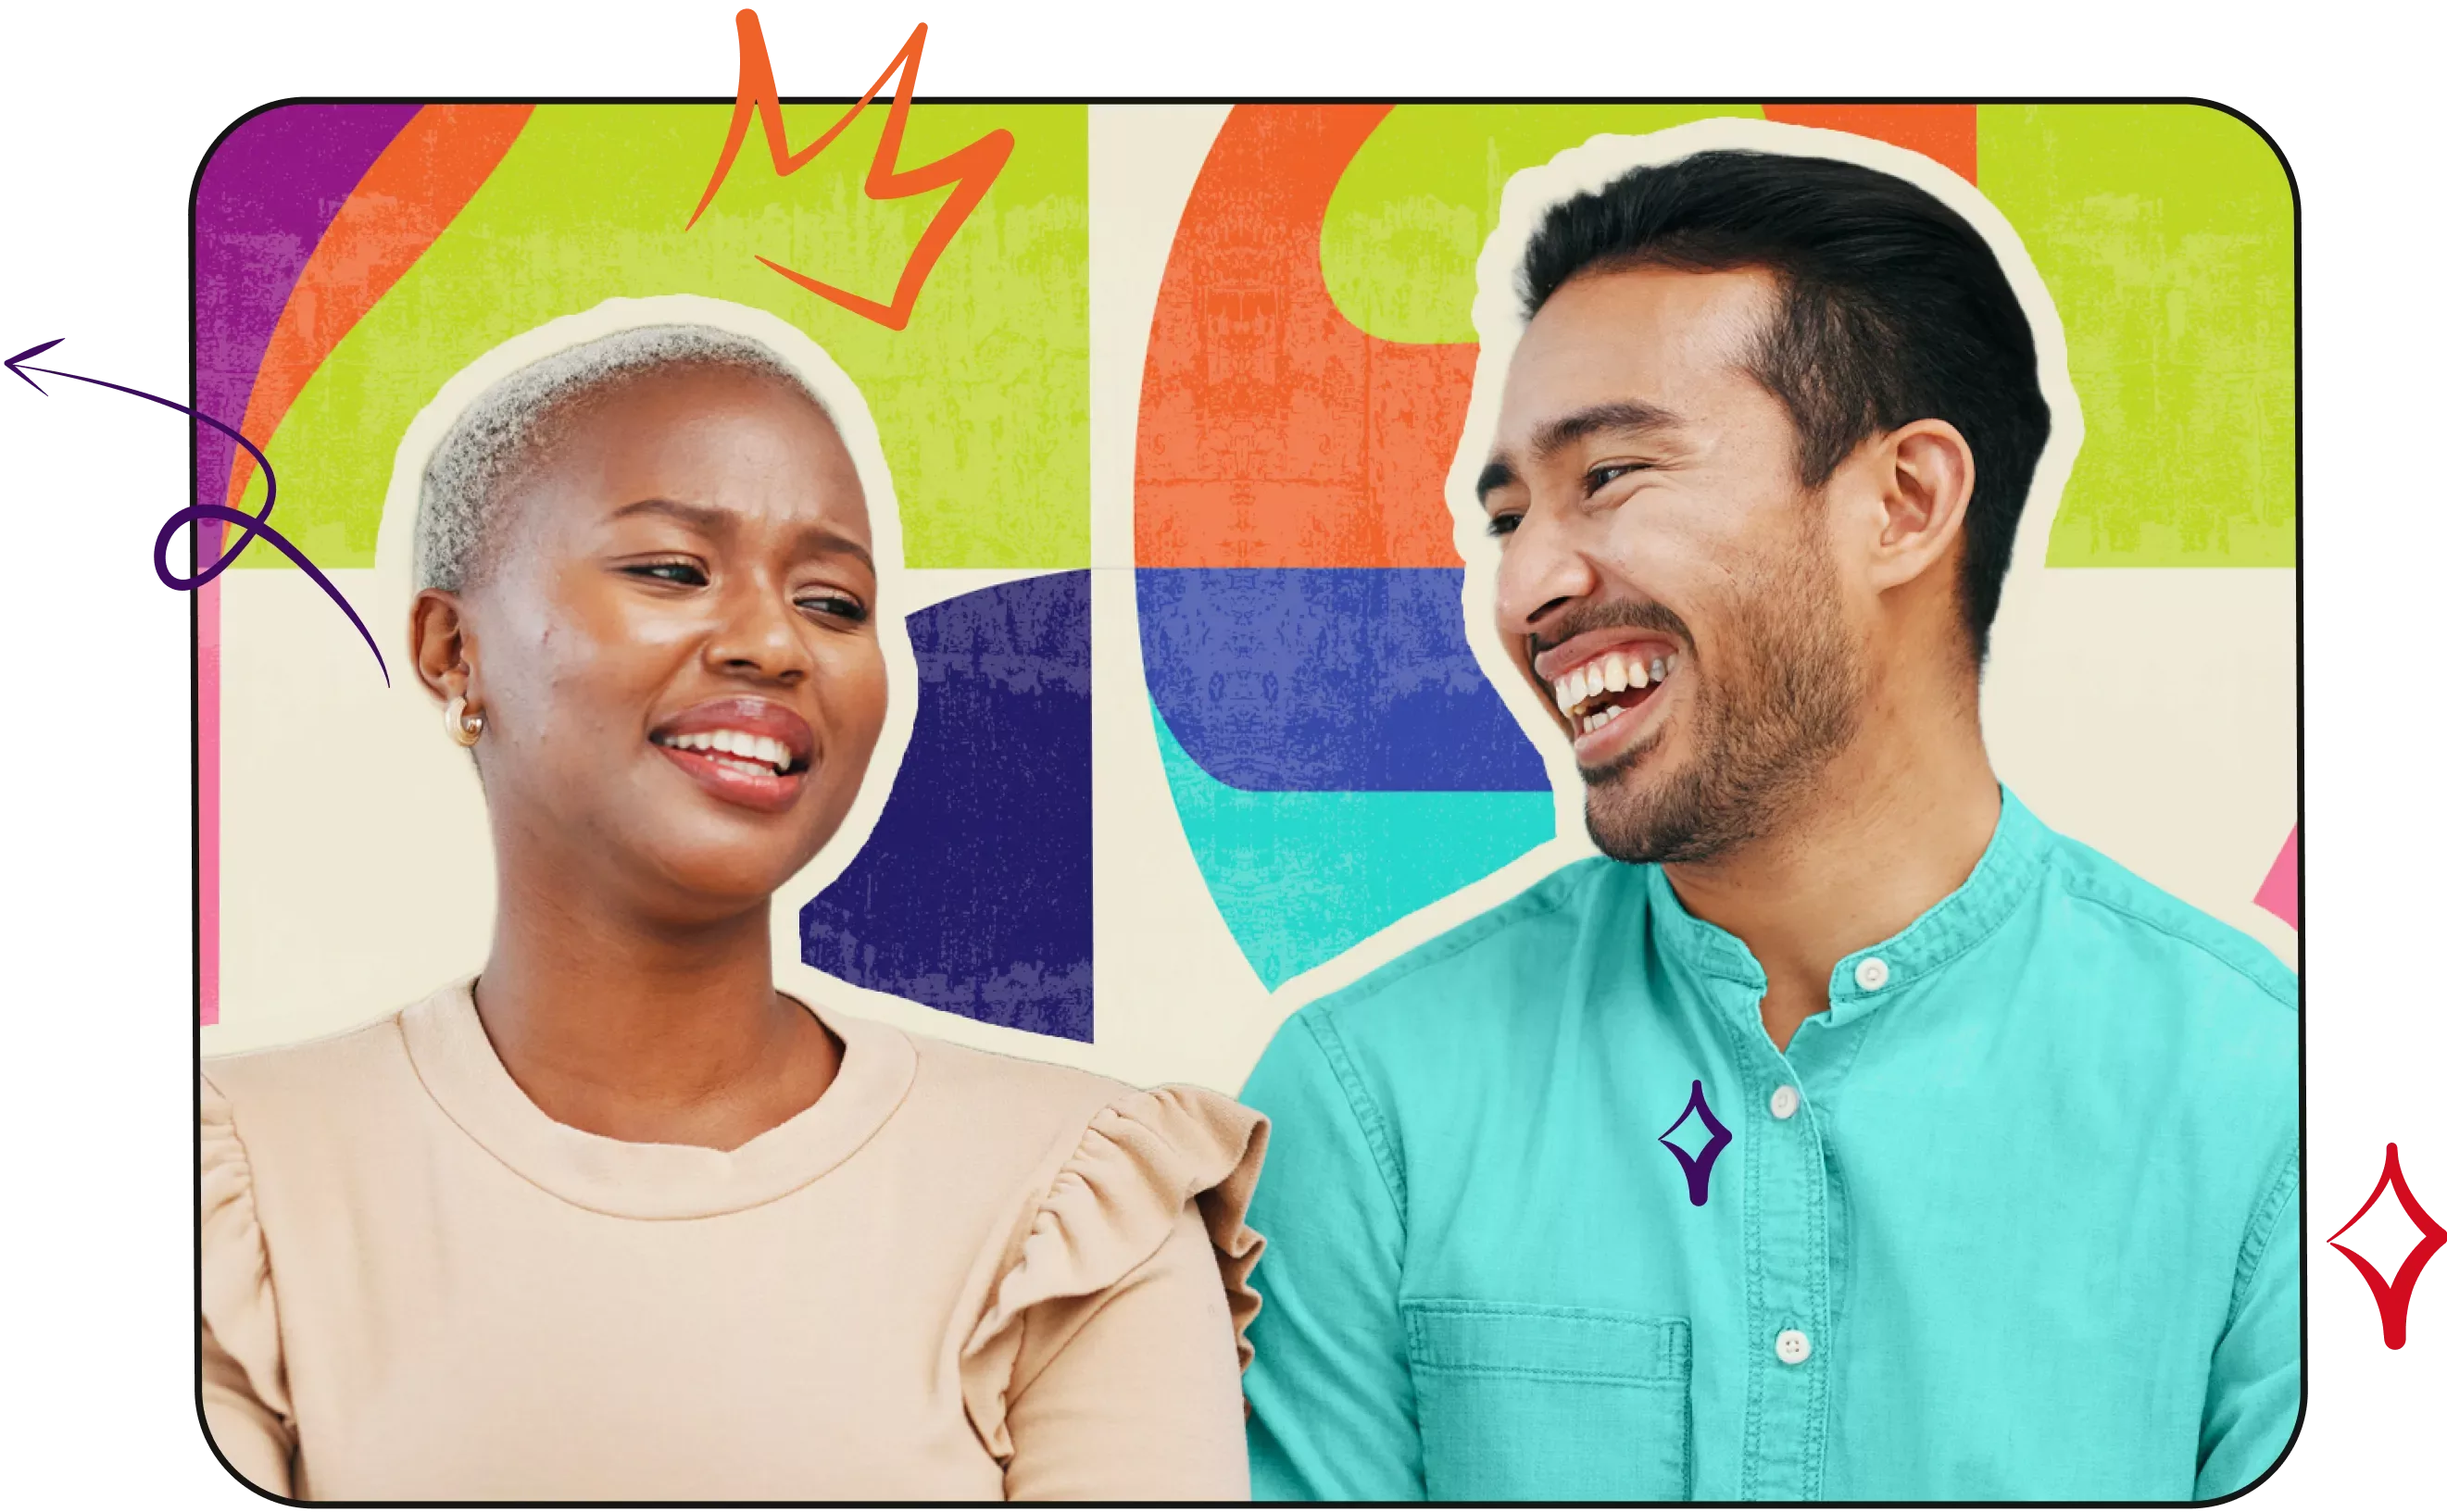 Black woman and Asian man laughing together